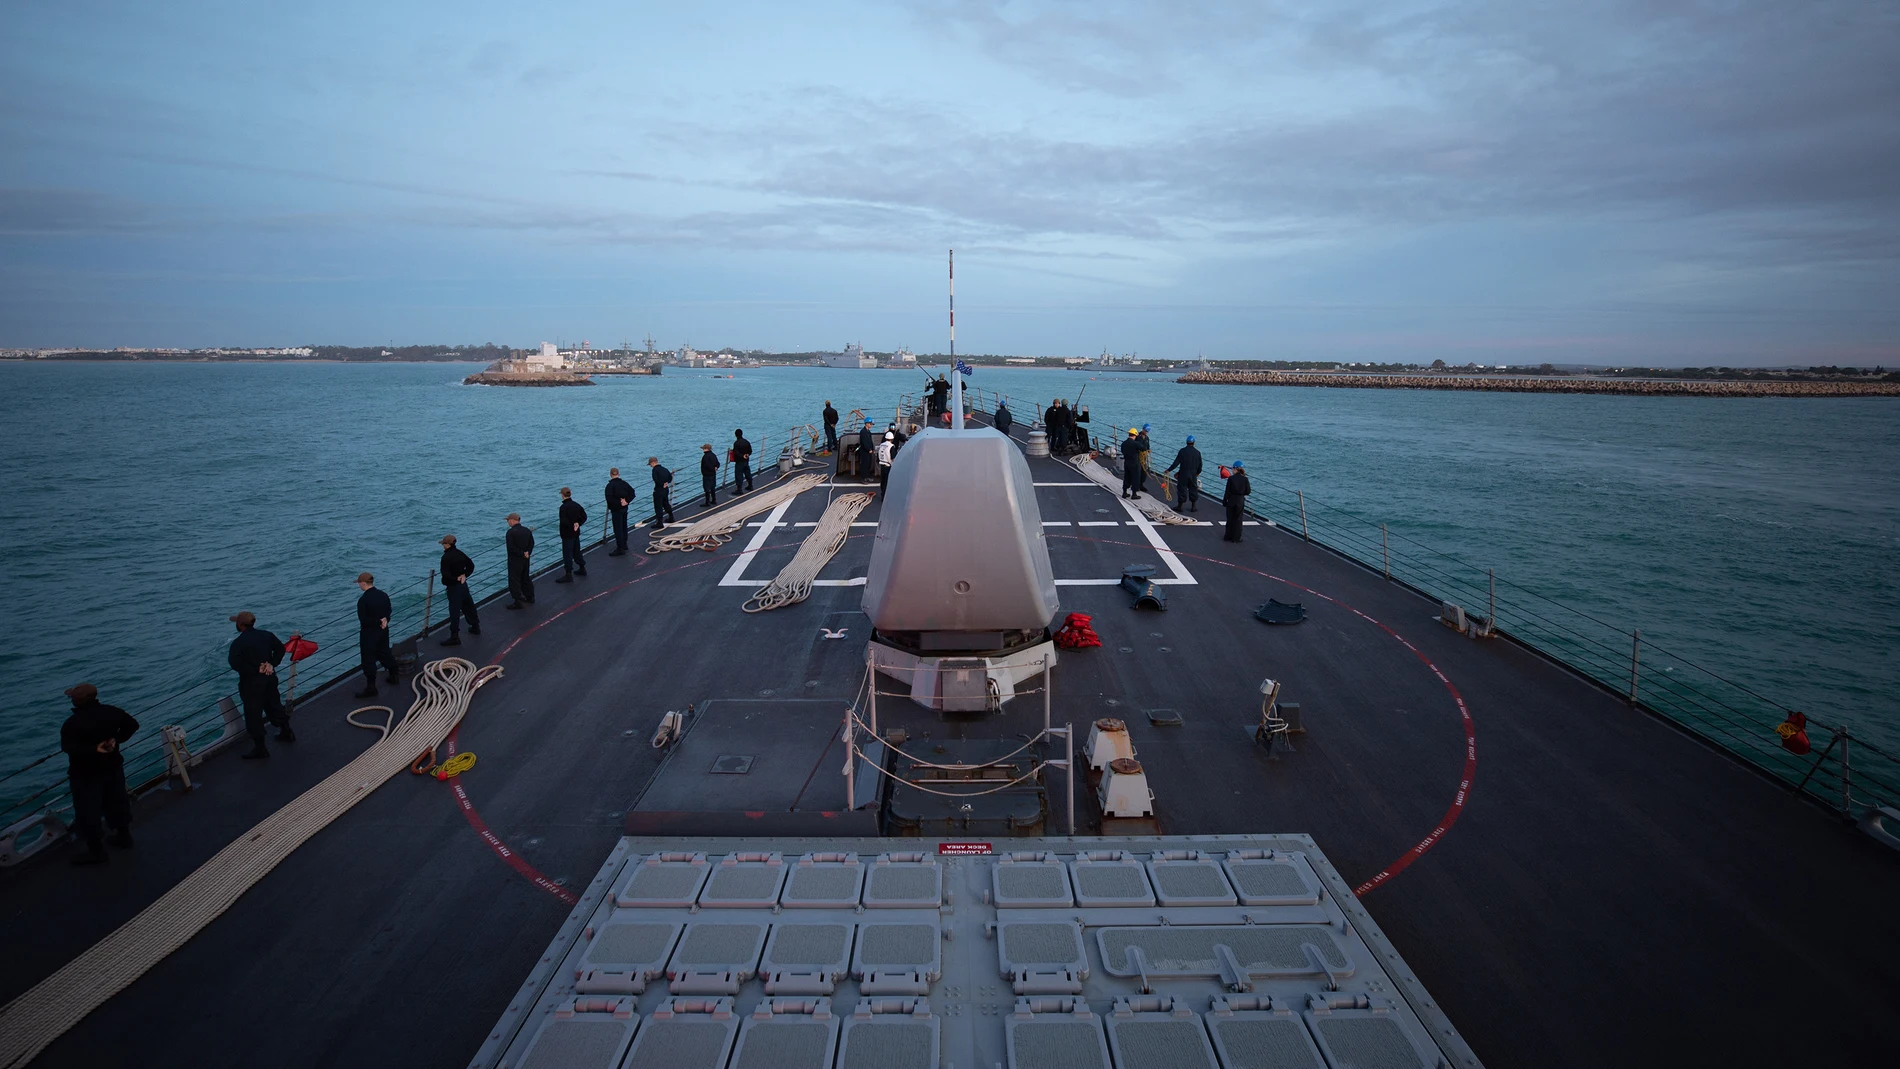 December 8, 2023 - Rota, Spain - The Arleigh Burke-class guided-missile destroyer USS Laboon (DDG 58) arrives in Rota, Spain, December. 8, 2023. Laboon is on a scheduled deployment in the U.S. Naval Forces Europe area of operations, employed by the U.S. 6th Fleet to defend U.S., Allied and partner interests. 08/12/2023